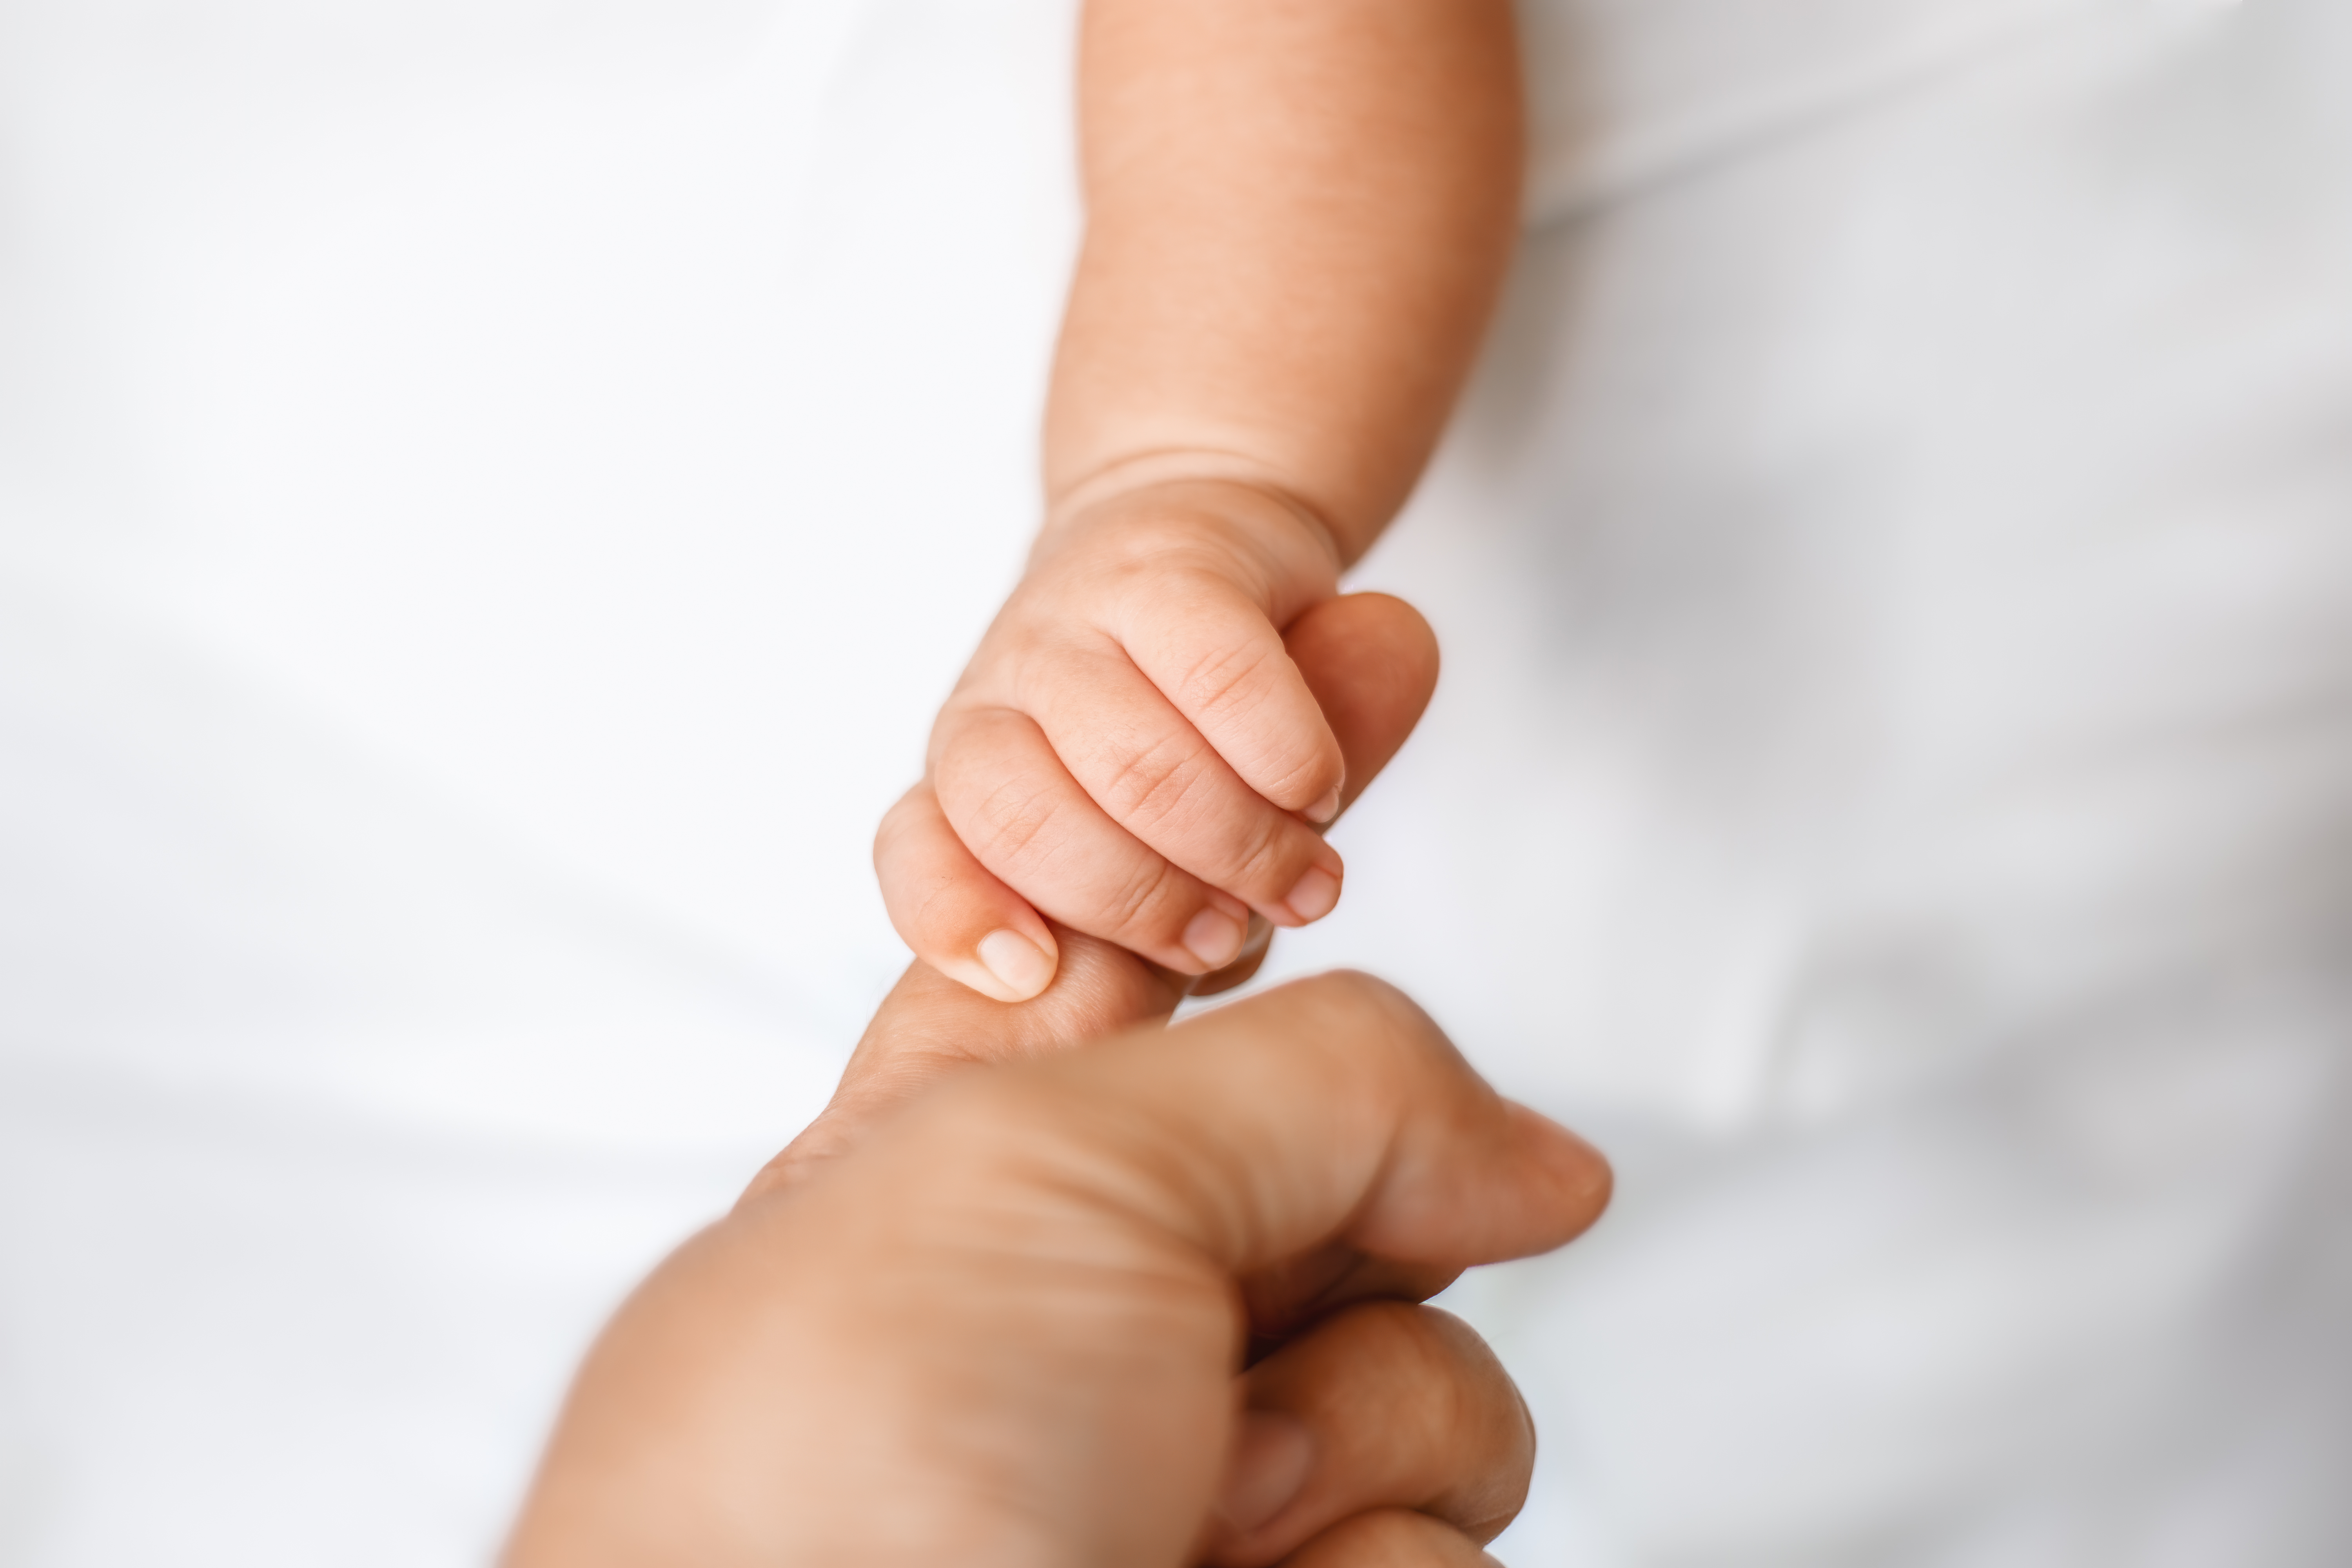 A newborn baby holding an adult finger | Source: Getty Images